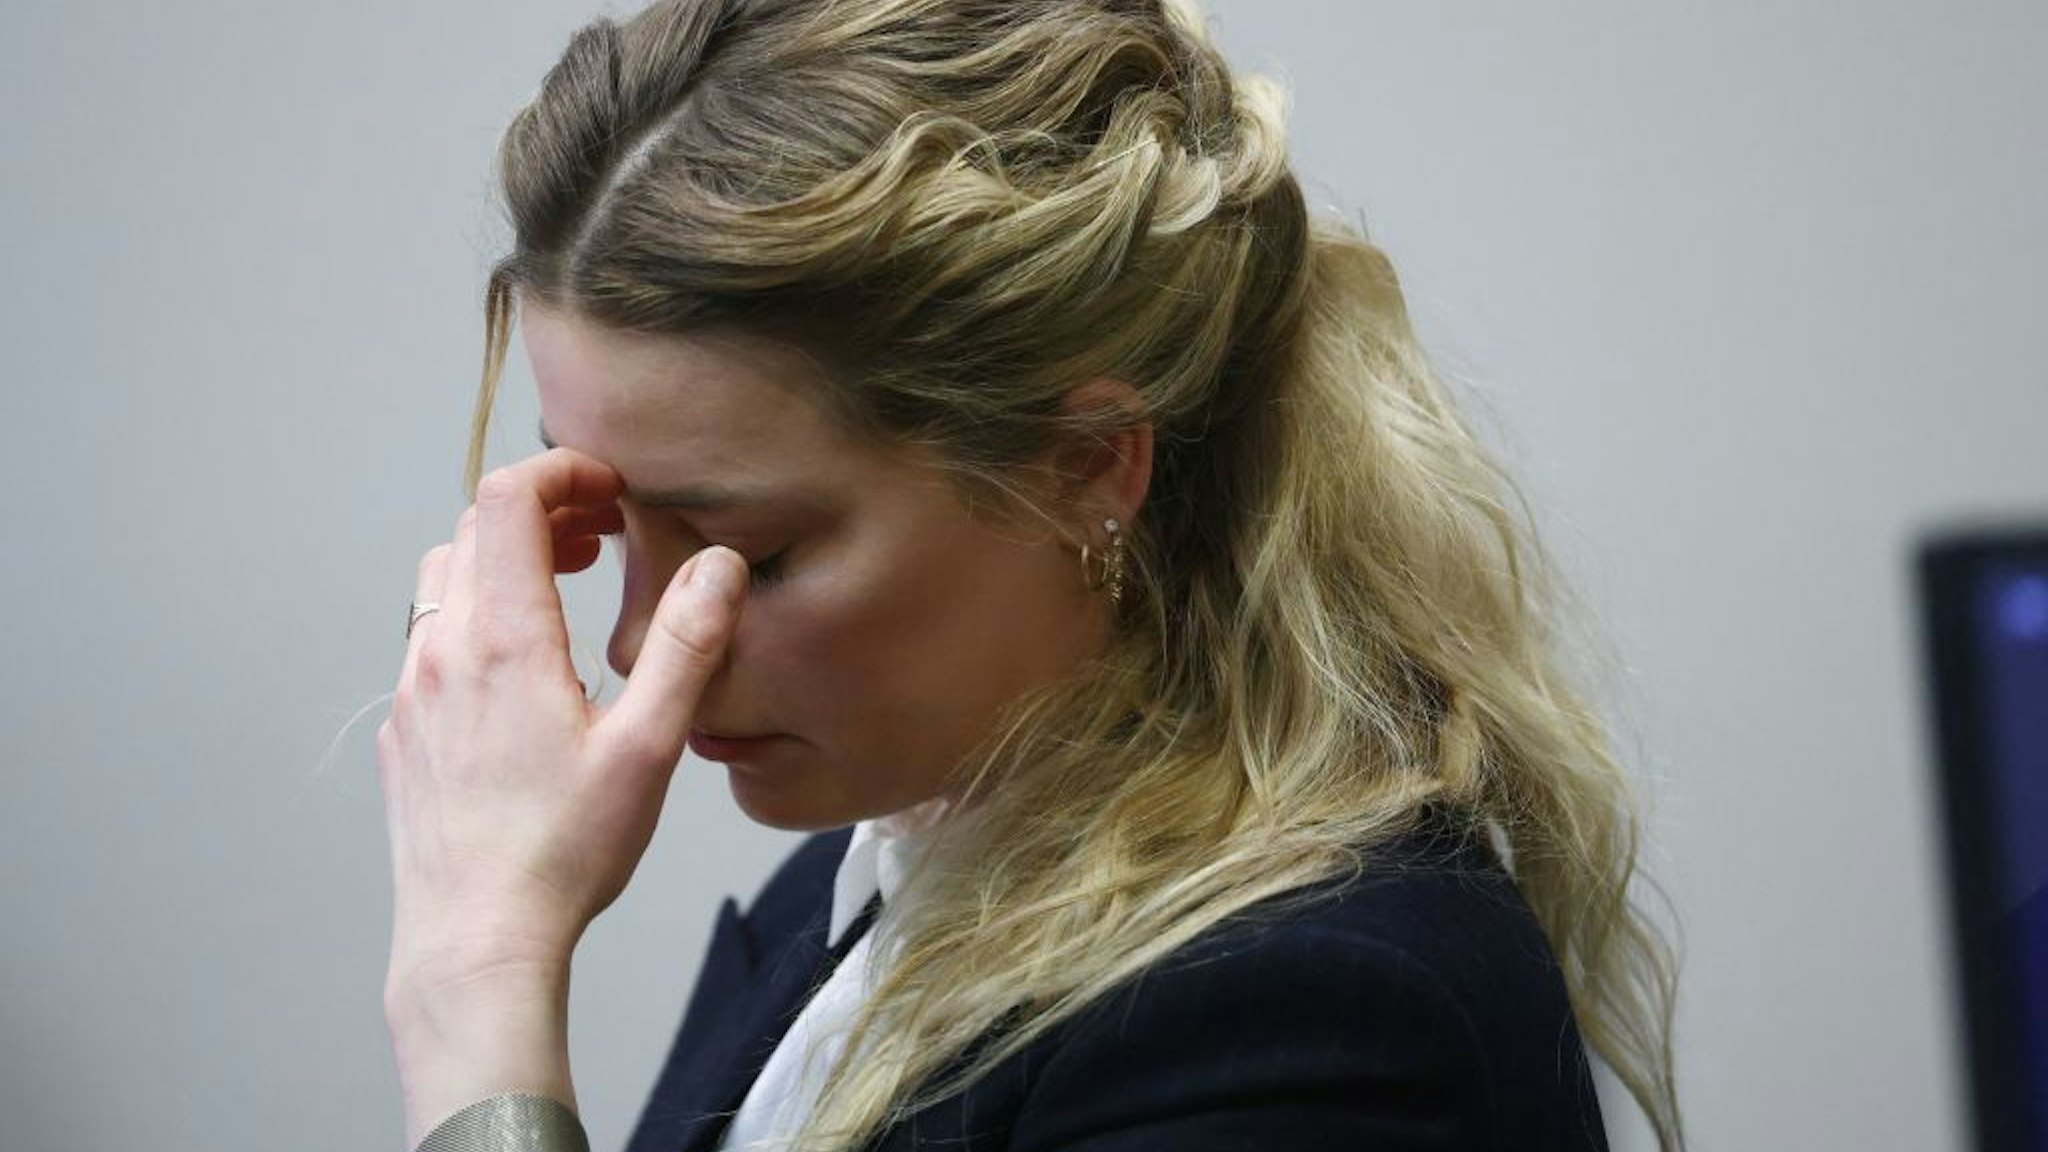 A psychologist testifying for Amber Heard's defense says ex-husband Johnny Depp conducted a "body cavity" search on her while looking for drugs.